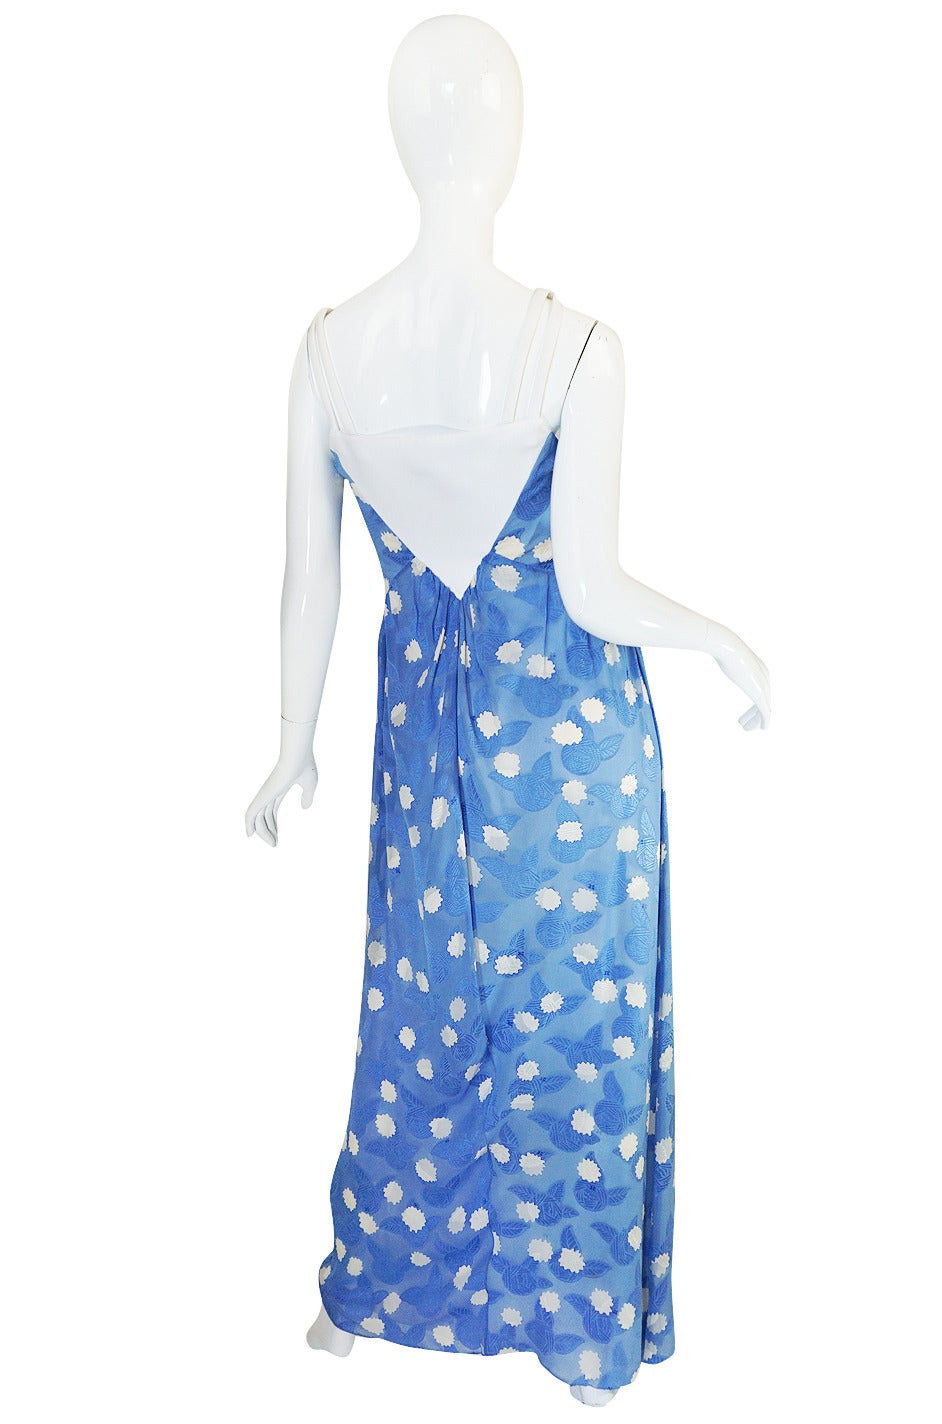 I am crazy for this dress. It is so unusual and so pretty and looks fabulous on. The blue fabric is a fine silk chiffon that has a textured design woven in tot eh fabric. Over that are little pops of white and scattered amongst those the Courreges